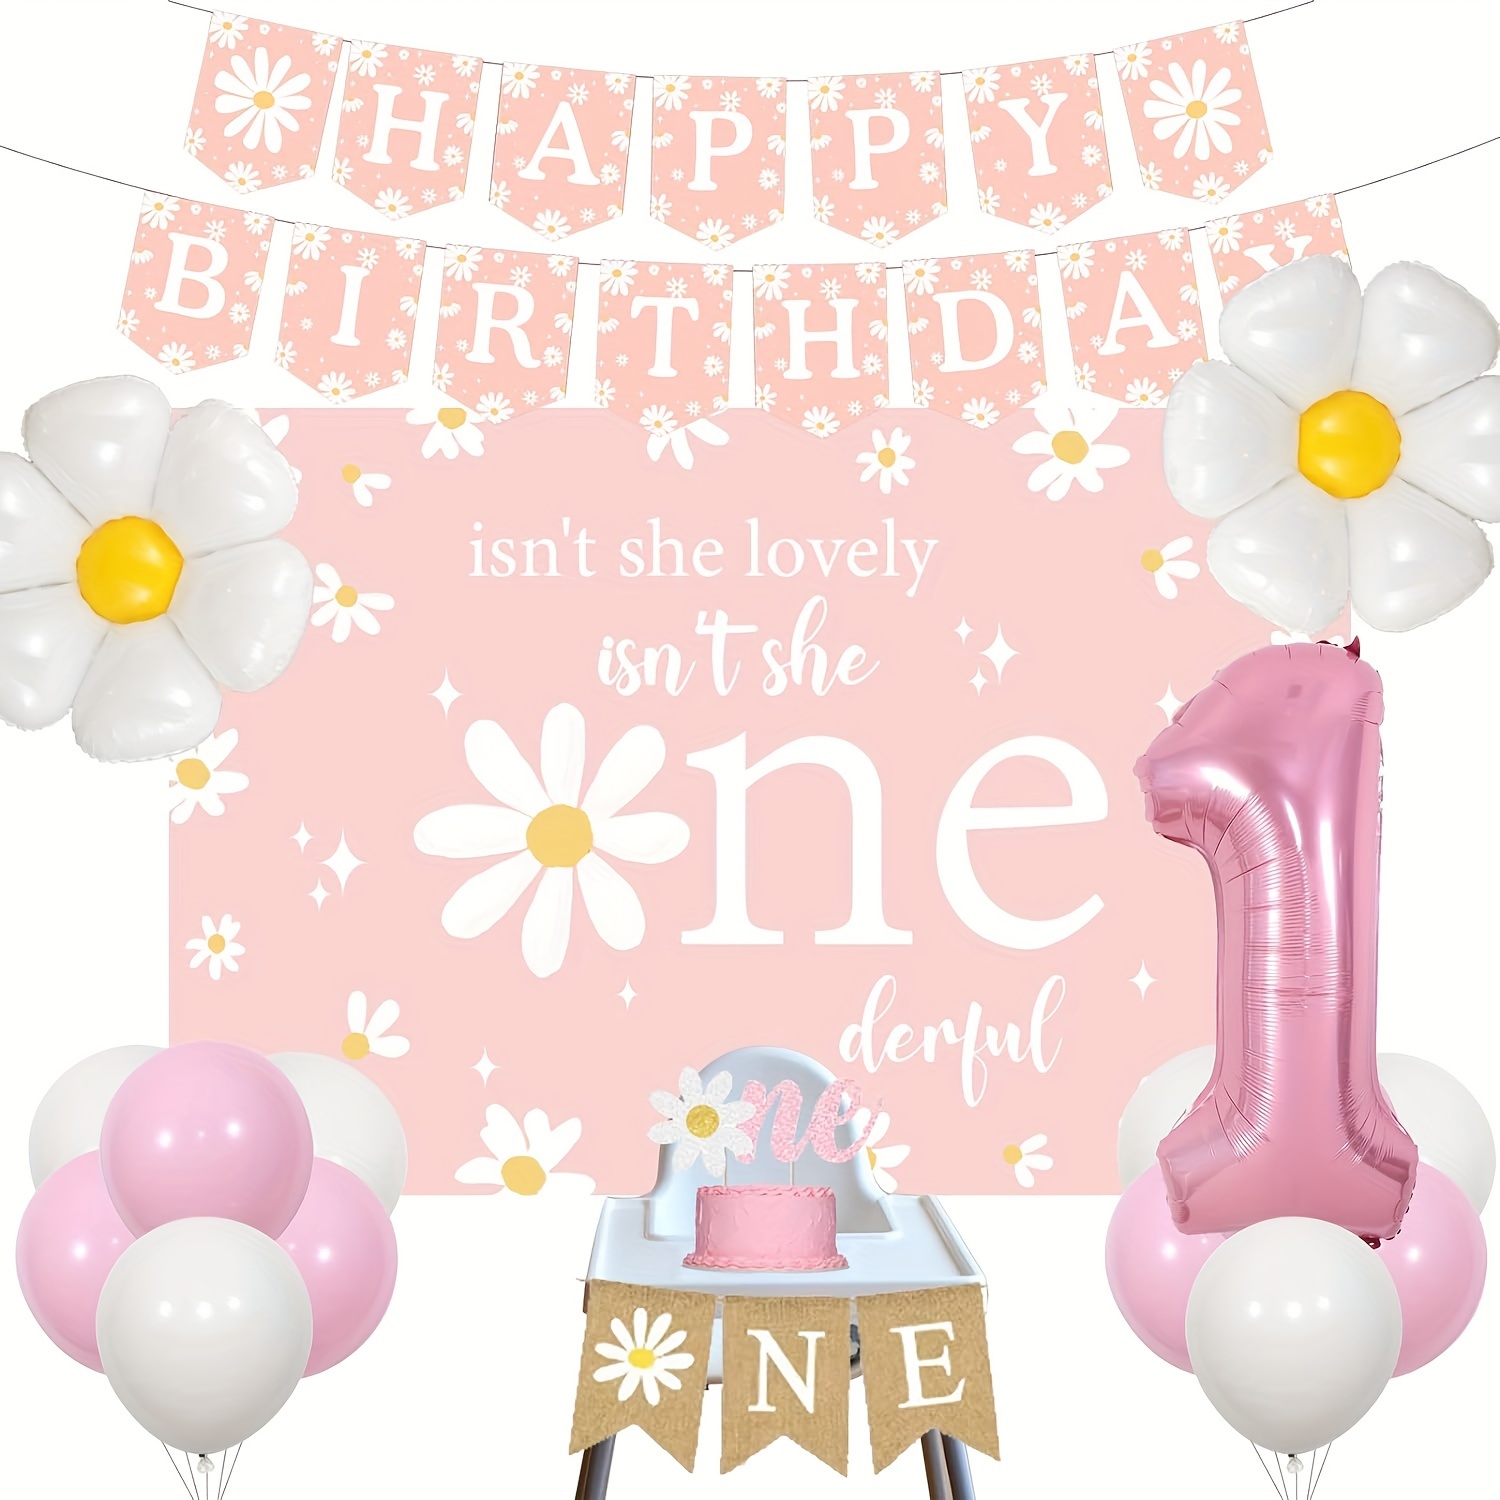 

1set Daisy Birthday Decorations, Pink And White Balloons Daisy Flower Number 1 Foil Balloon, Isn't She Lovely Isn't She Onederful Backdrop, Happy Birthday High Chair Banner Cake Topper